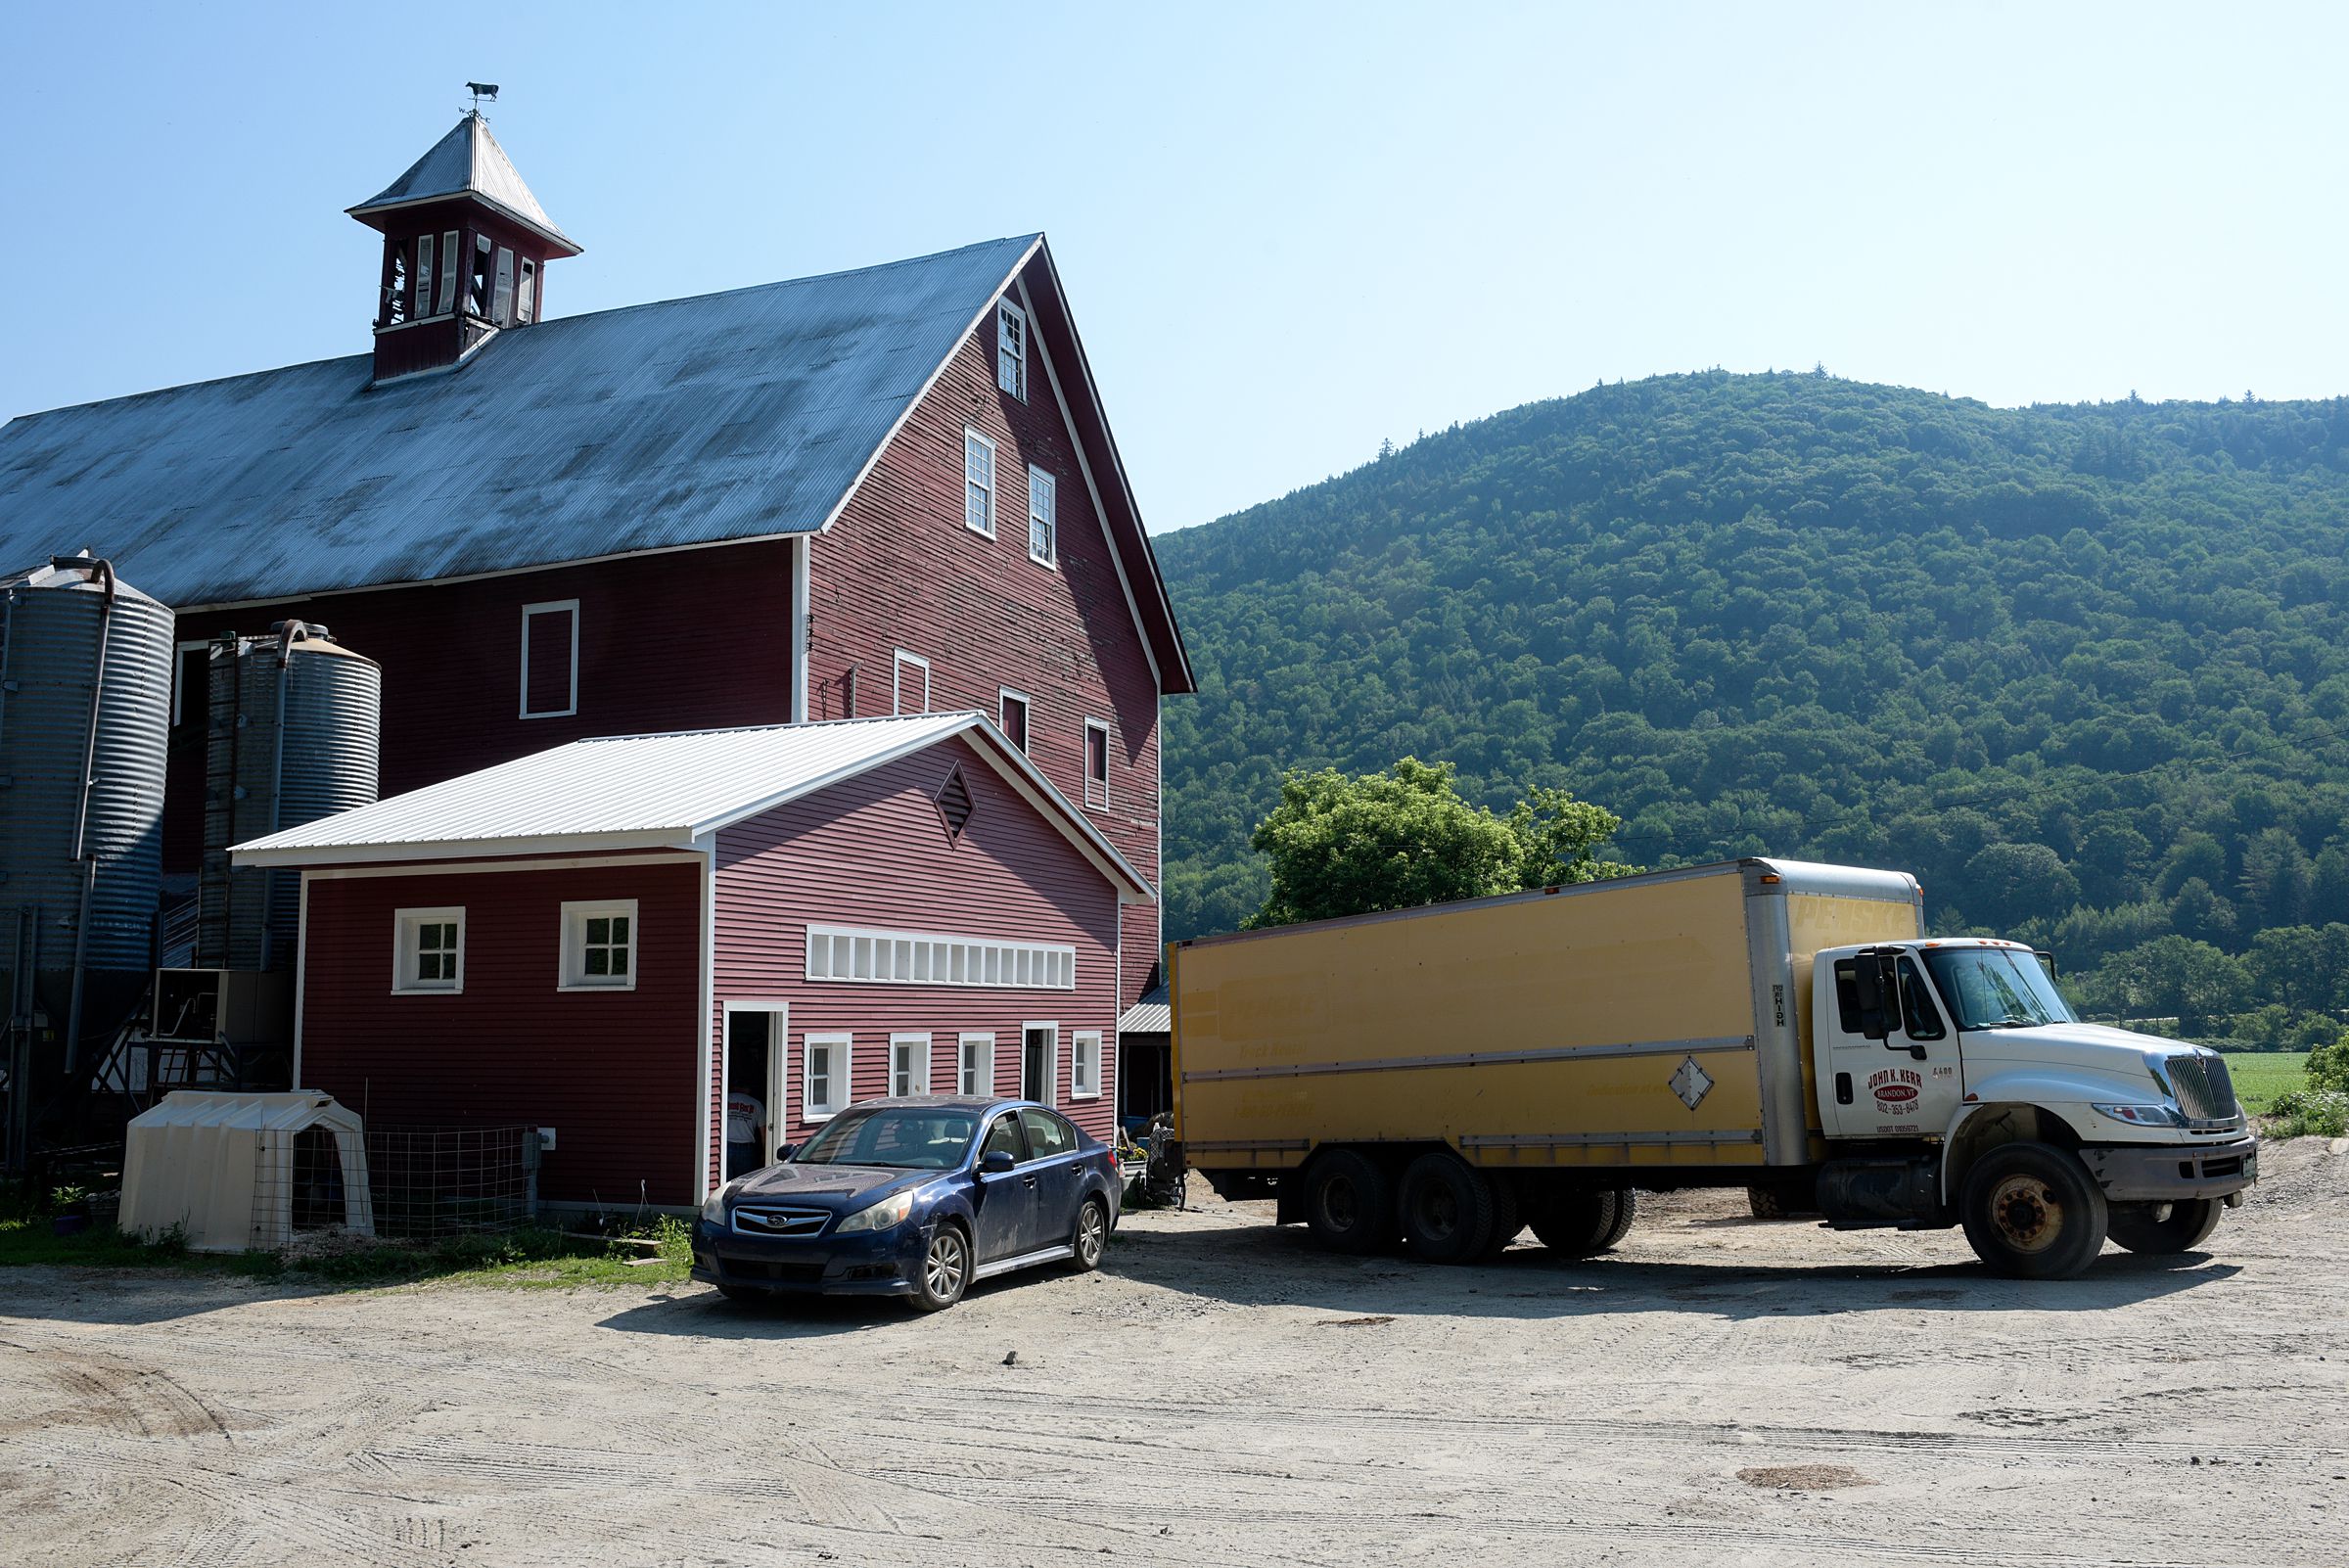 John Kerr's delivery truck is parked outside the barn at Liberty Hill Farm during a delivery in Rochester, Vt., Wednesday, July 3, 2019. "He's a great barometer of what is happening on the farm, what farms need and what the dairy industry needs," said Beth Kennett, of Liberty Hill Farm. (Valley News - James M. Patterson) Copyright Valley News. May not be reprinted or used online without permission. Send requests to permission@vnews.com.